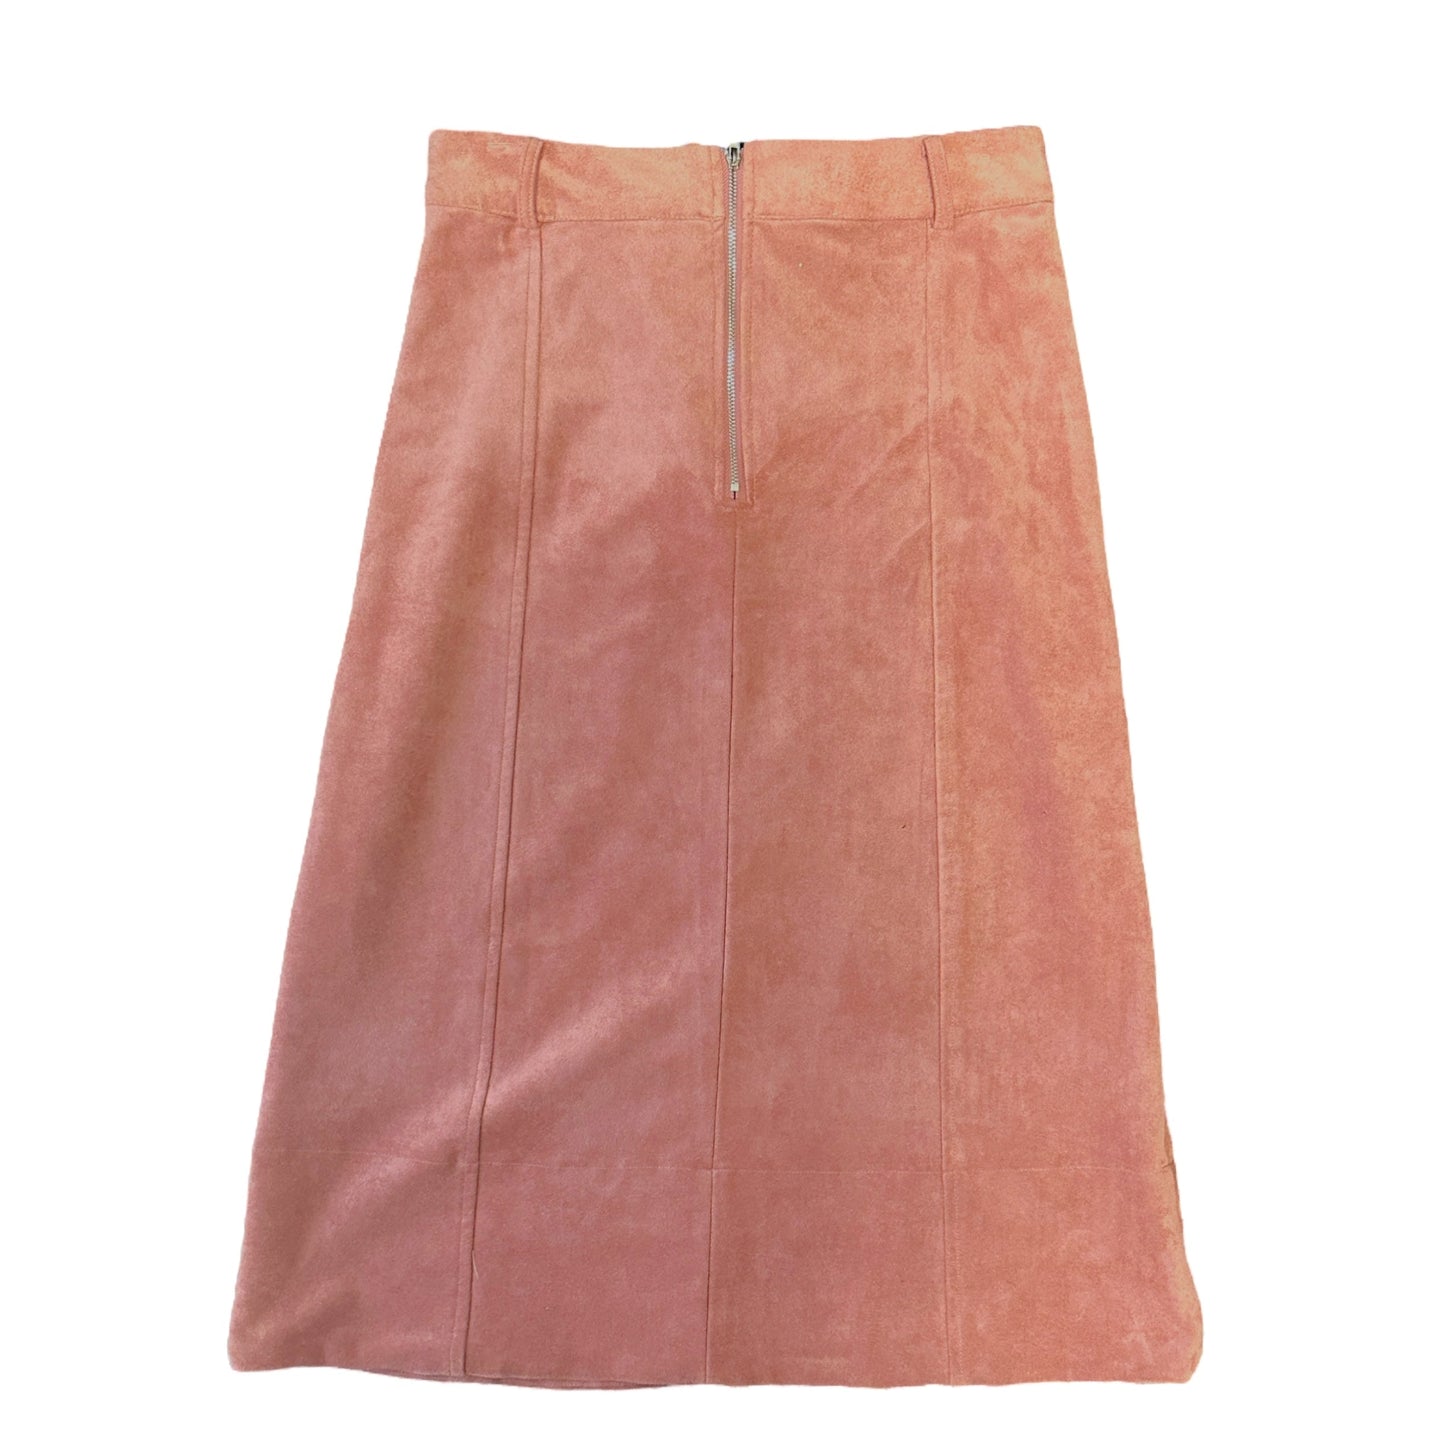 Microsuede Midi Skirt in Pink Endless Rose, Size M